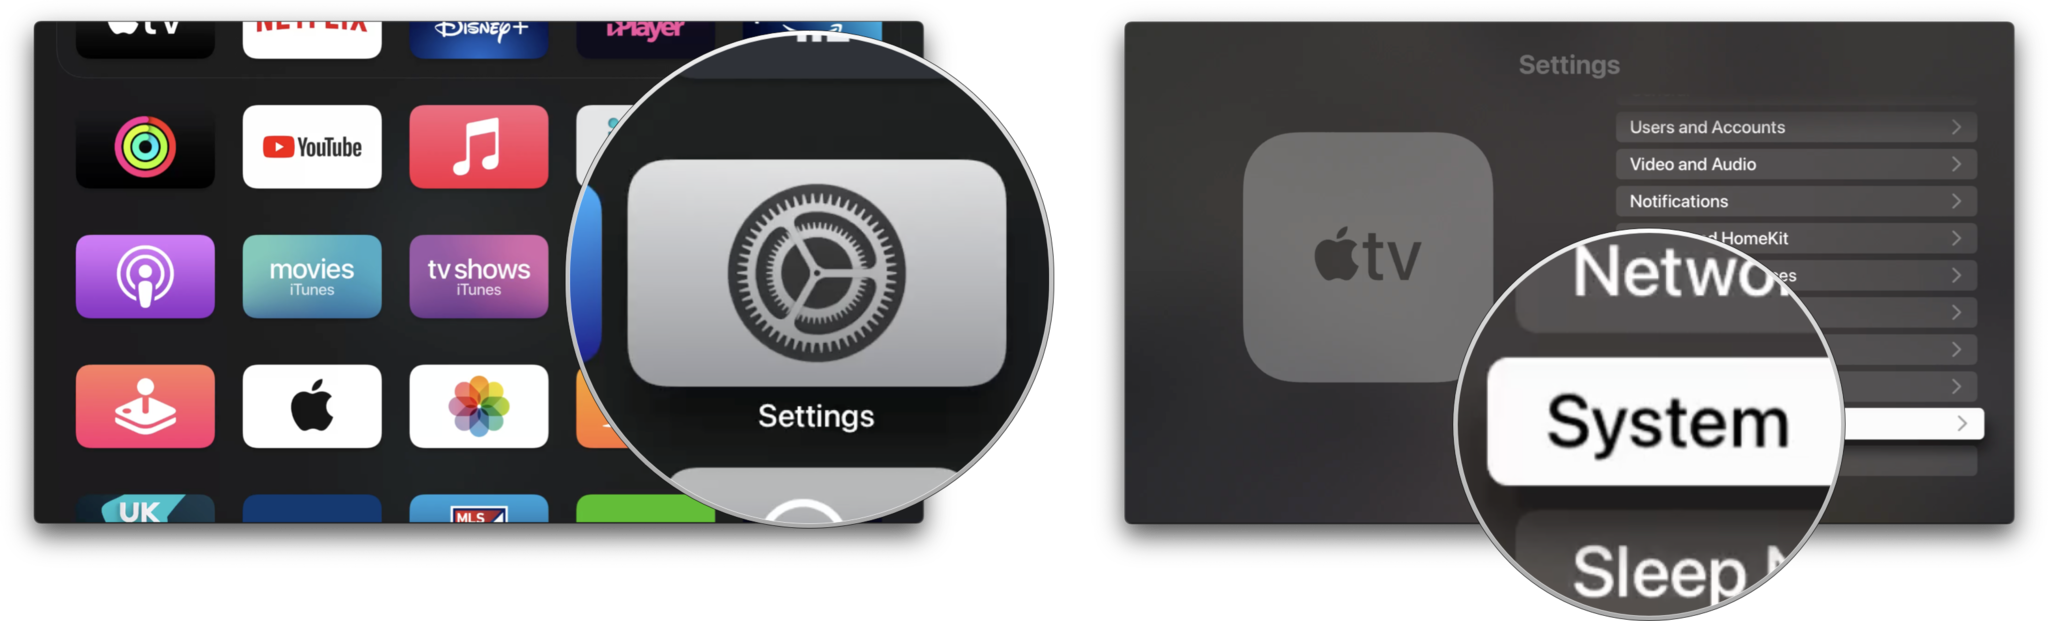 How to update from tvOS beta to the official release: Click on Settings, click on System